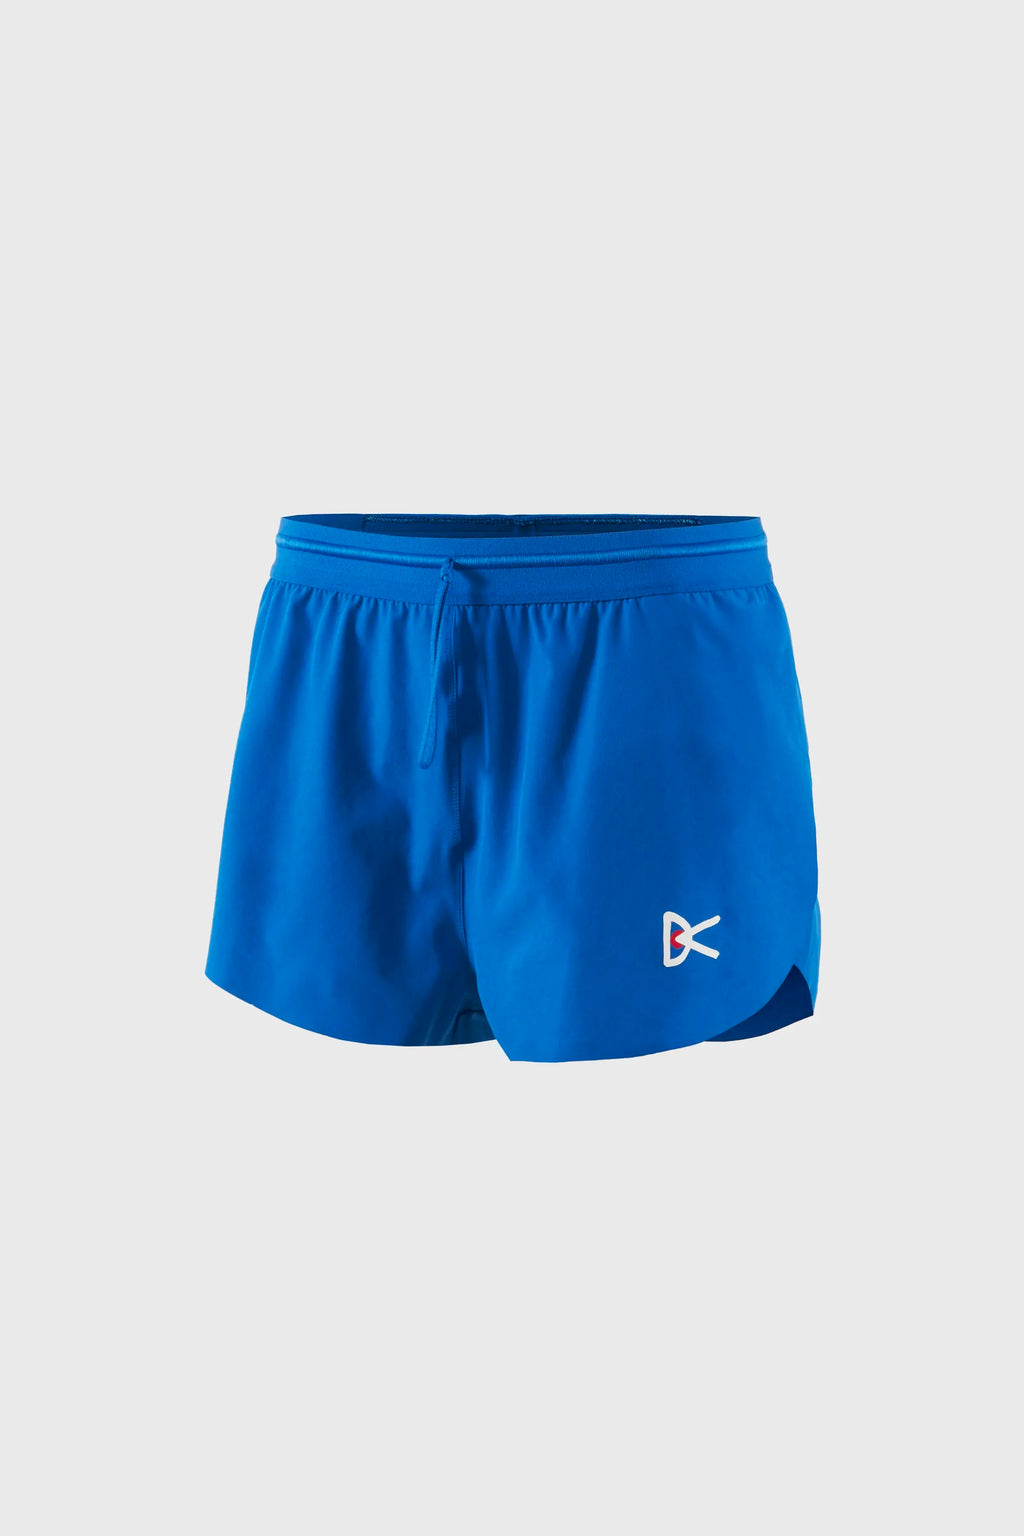 District Vision 2in Race Shorts